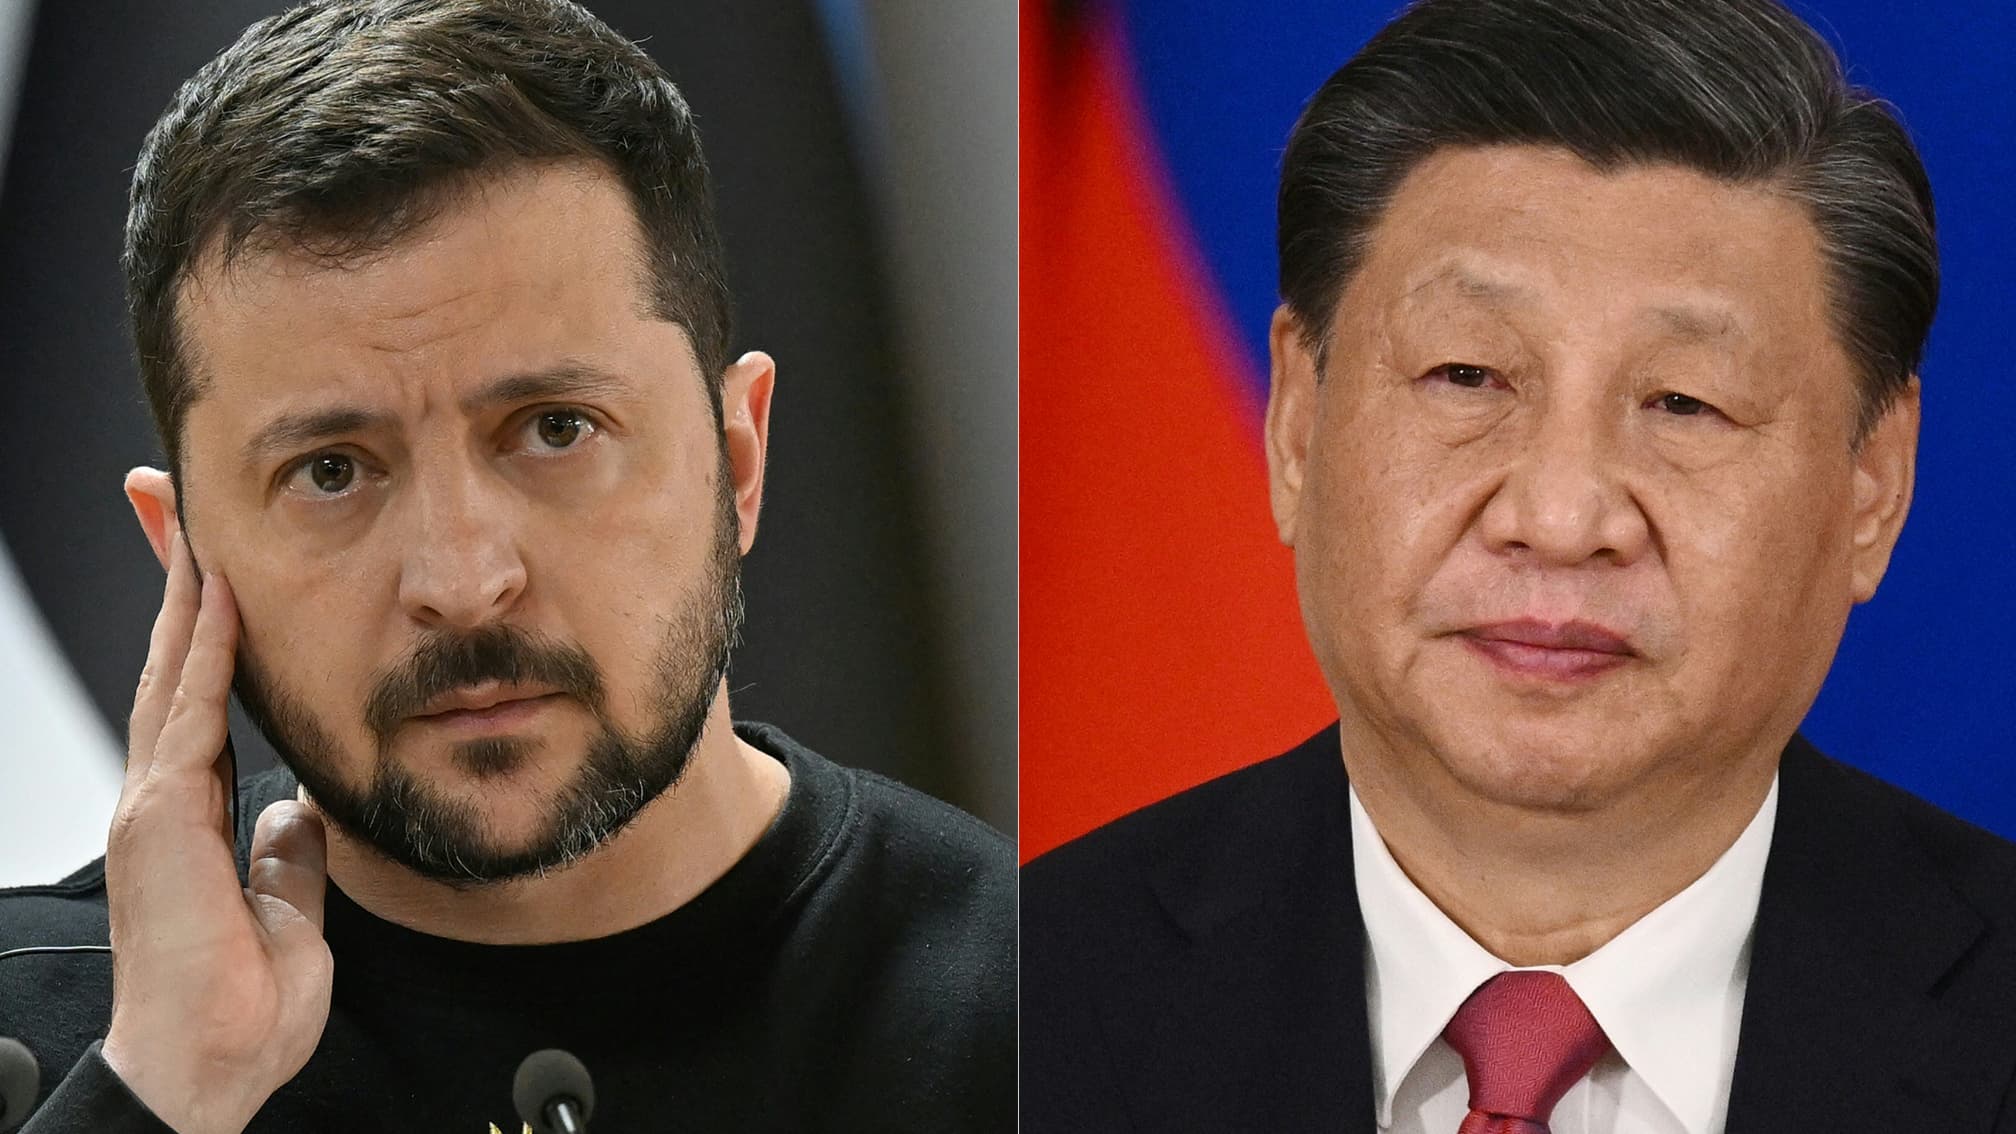 Zelensky says Xi Jinping 'gave him his word' that China would not sell arms to Russia